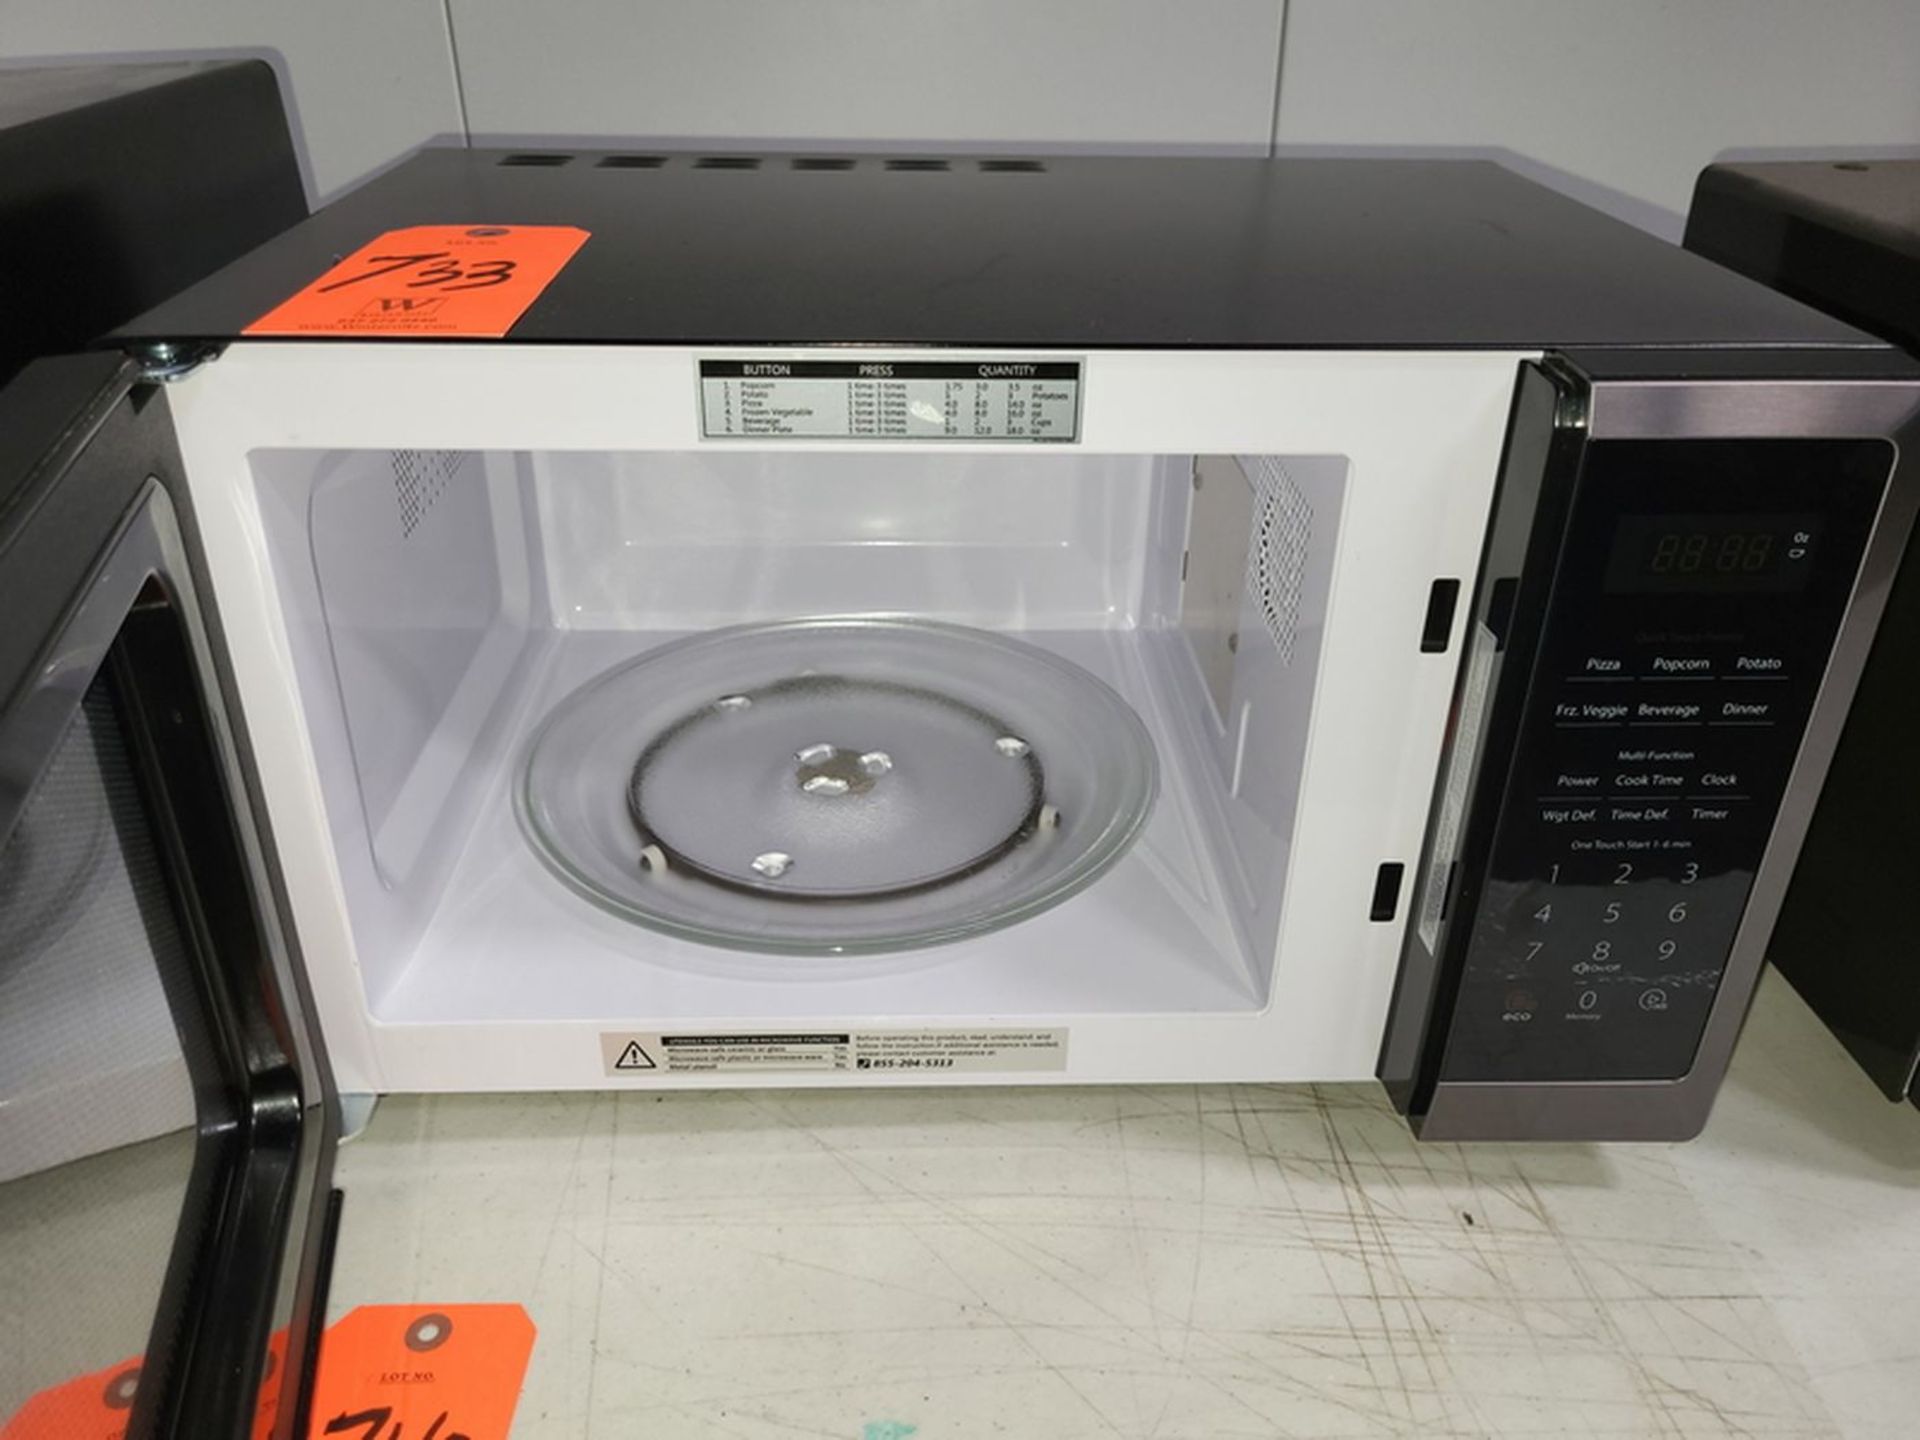 Toshiba Model ML2-EM09PA(BS) Microwave Oven, S/N: 347C601010113111100301 (2021); 120-Volt - Image 2 of 2